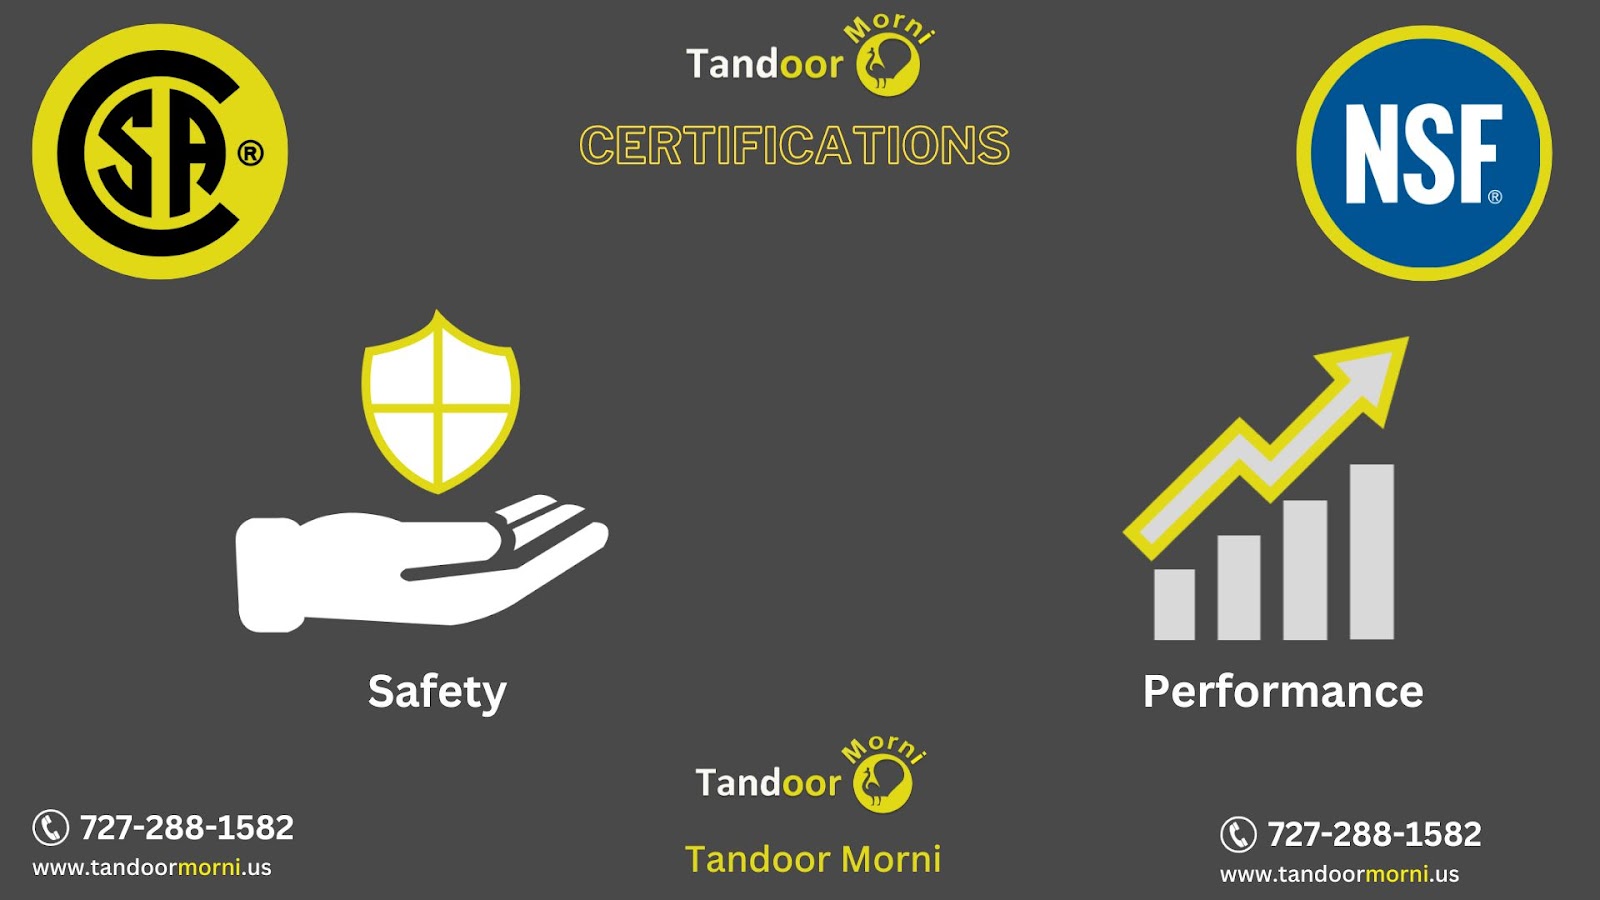 The CSA and NSF certifications confirm the tandoor's safety and functionality. Both certificates are required for the tandoor.